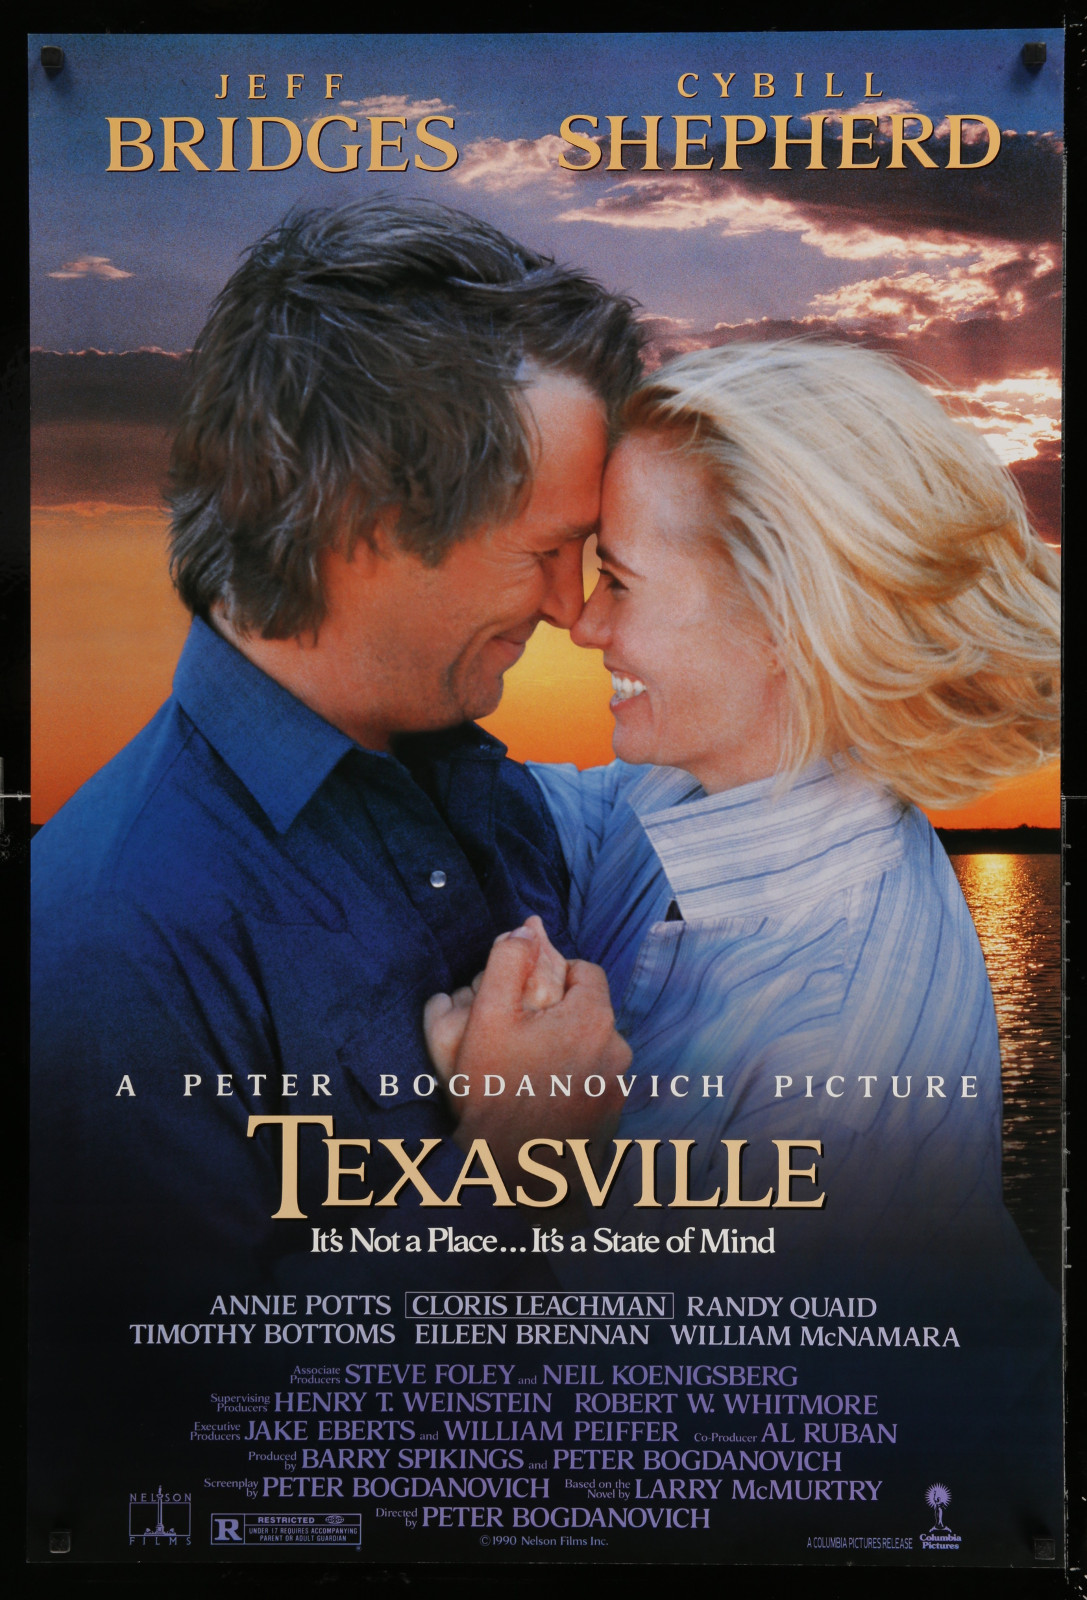 Texasville 2A414 A Part Of A Lot 20 Unfolded Double-Sided And Single-Sided One-Sheets '80S-90S Great Movie Images!